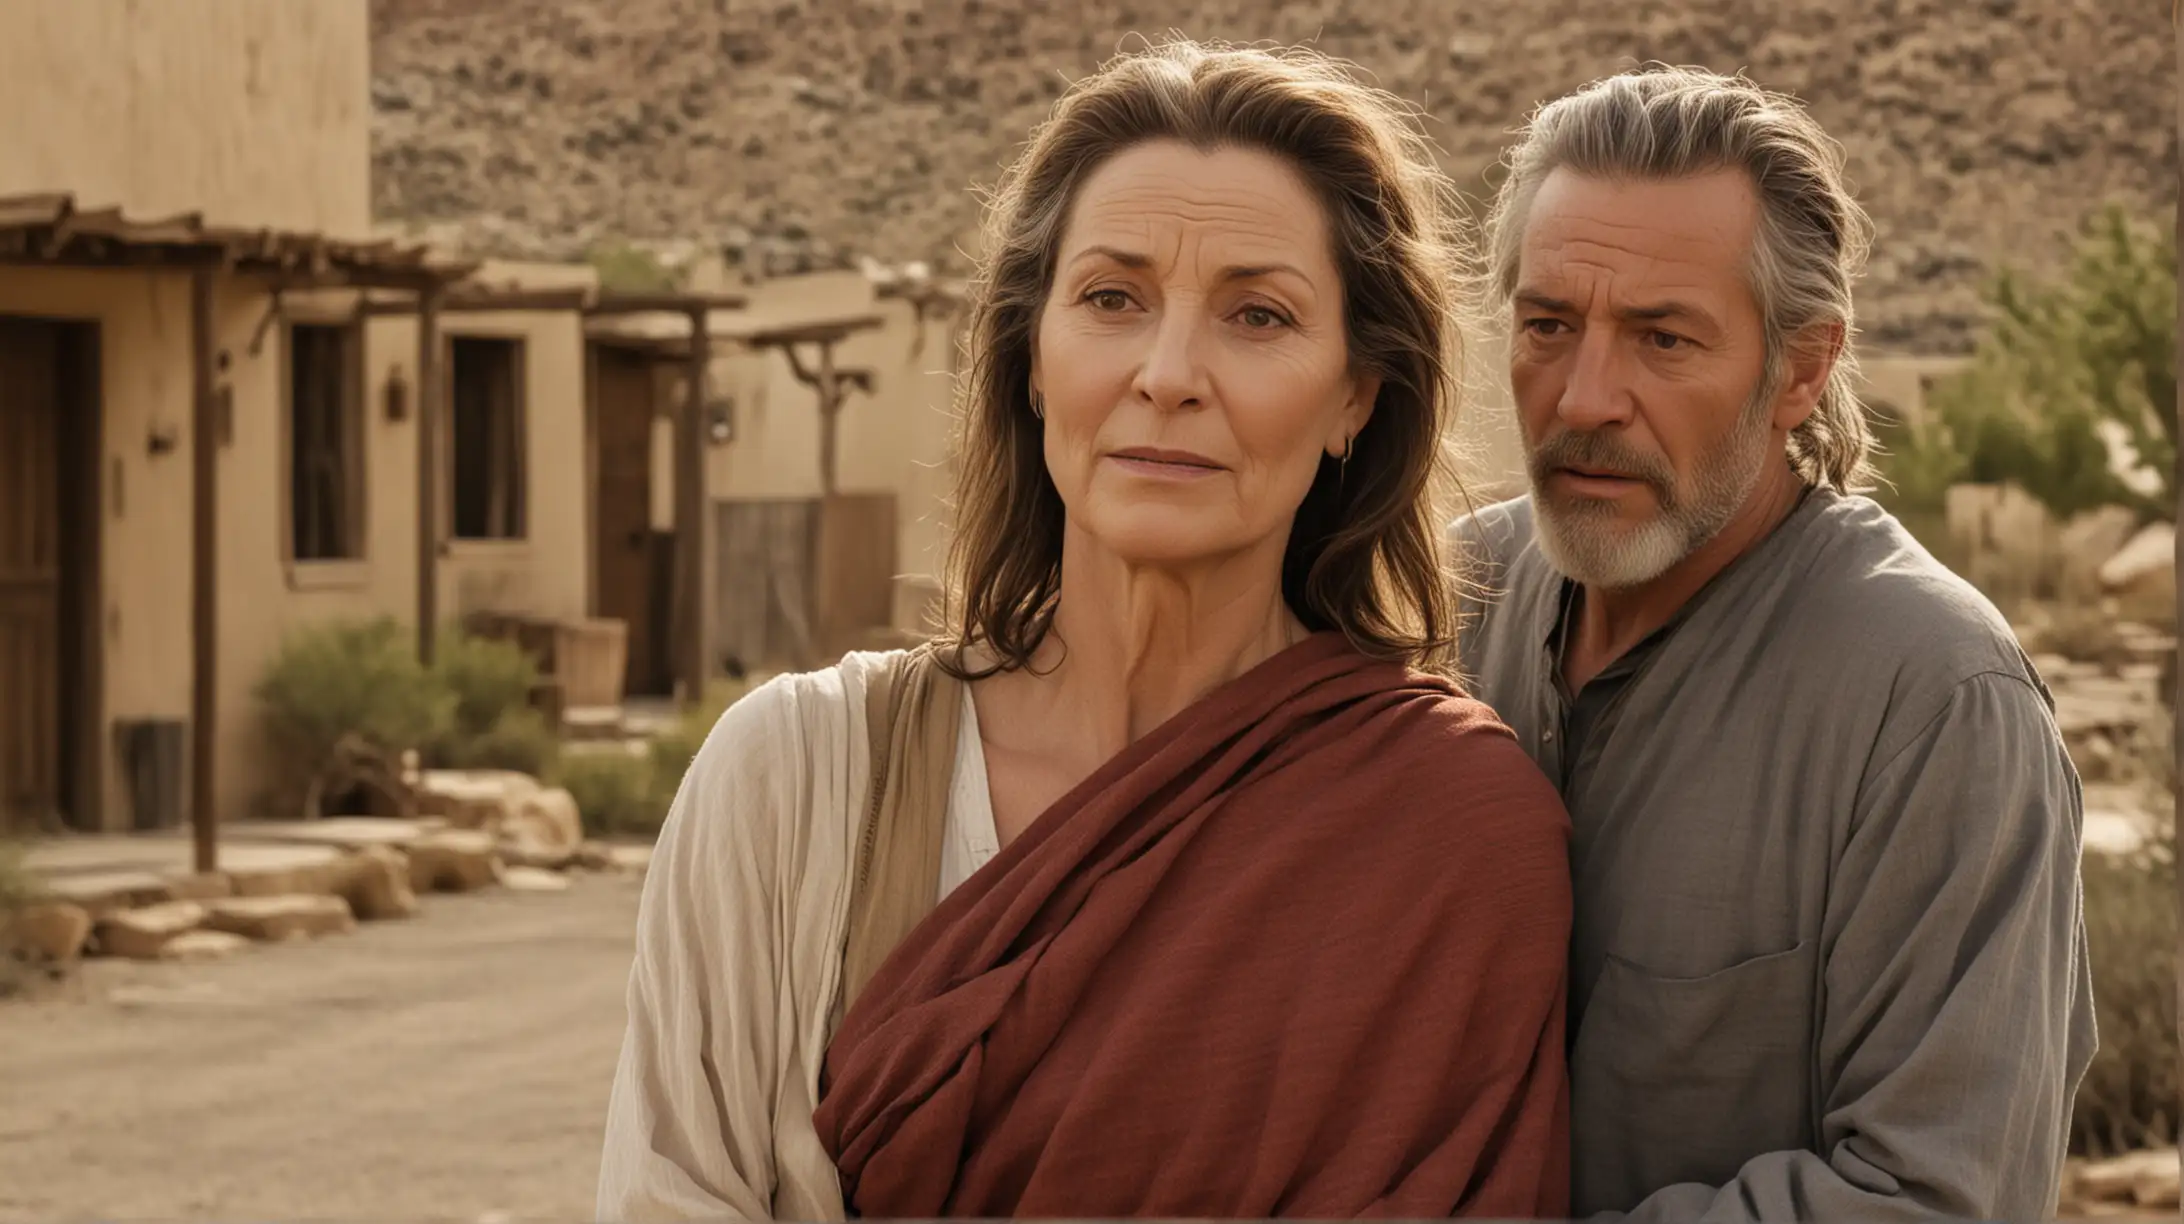 an attractive 50 year old woman, and her adult son, set in a desert town, during the era of the Biblical Moses